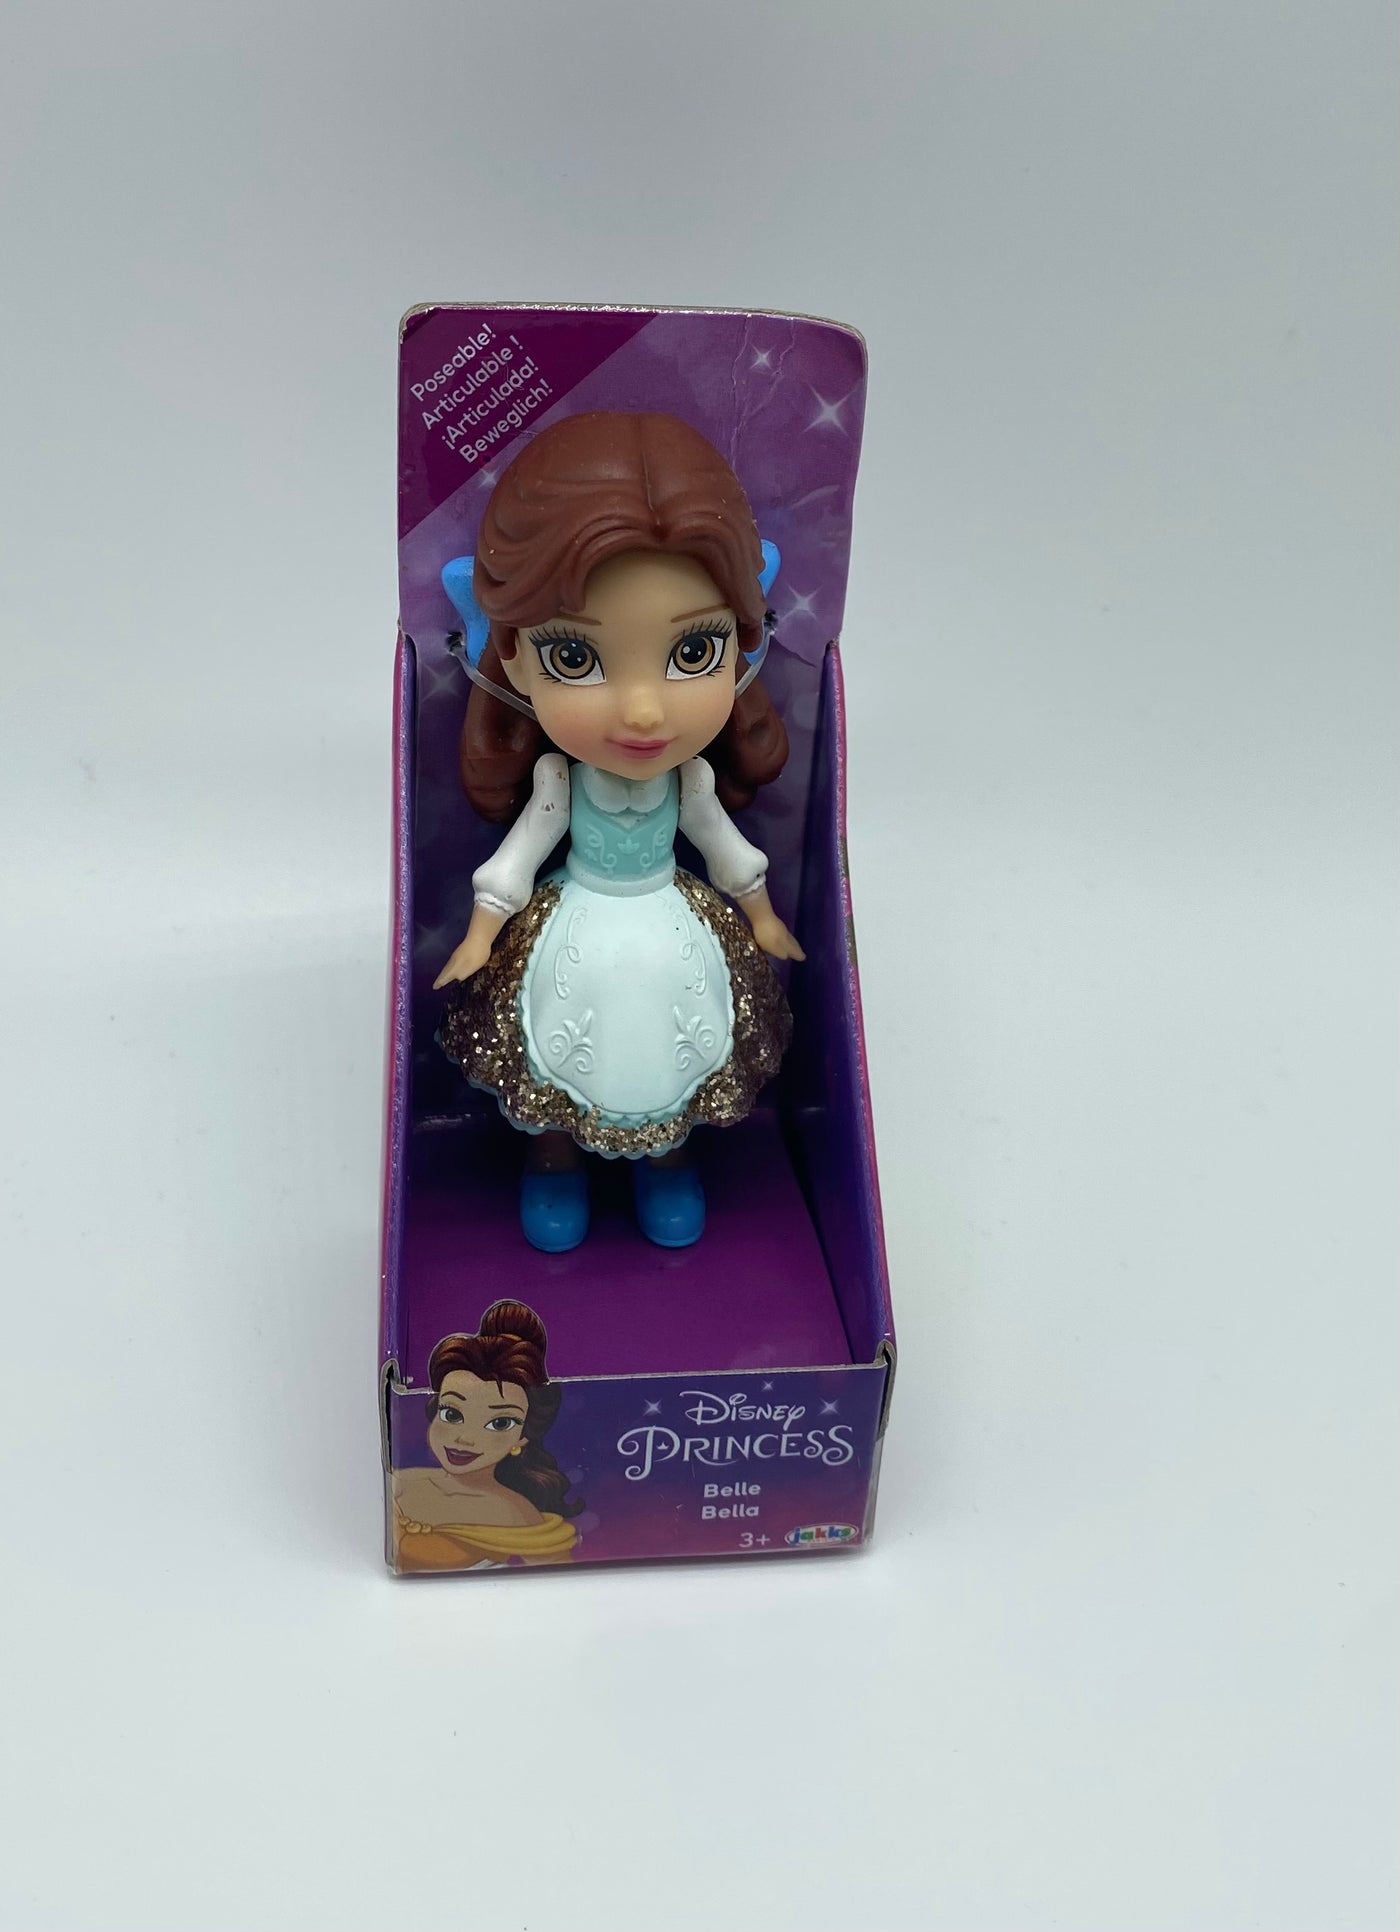 Disney Princess Belle Mini Gold Glitter Toddler Doll New with Box